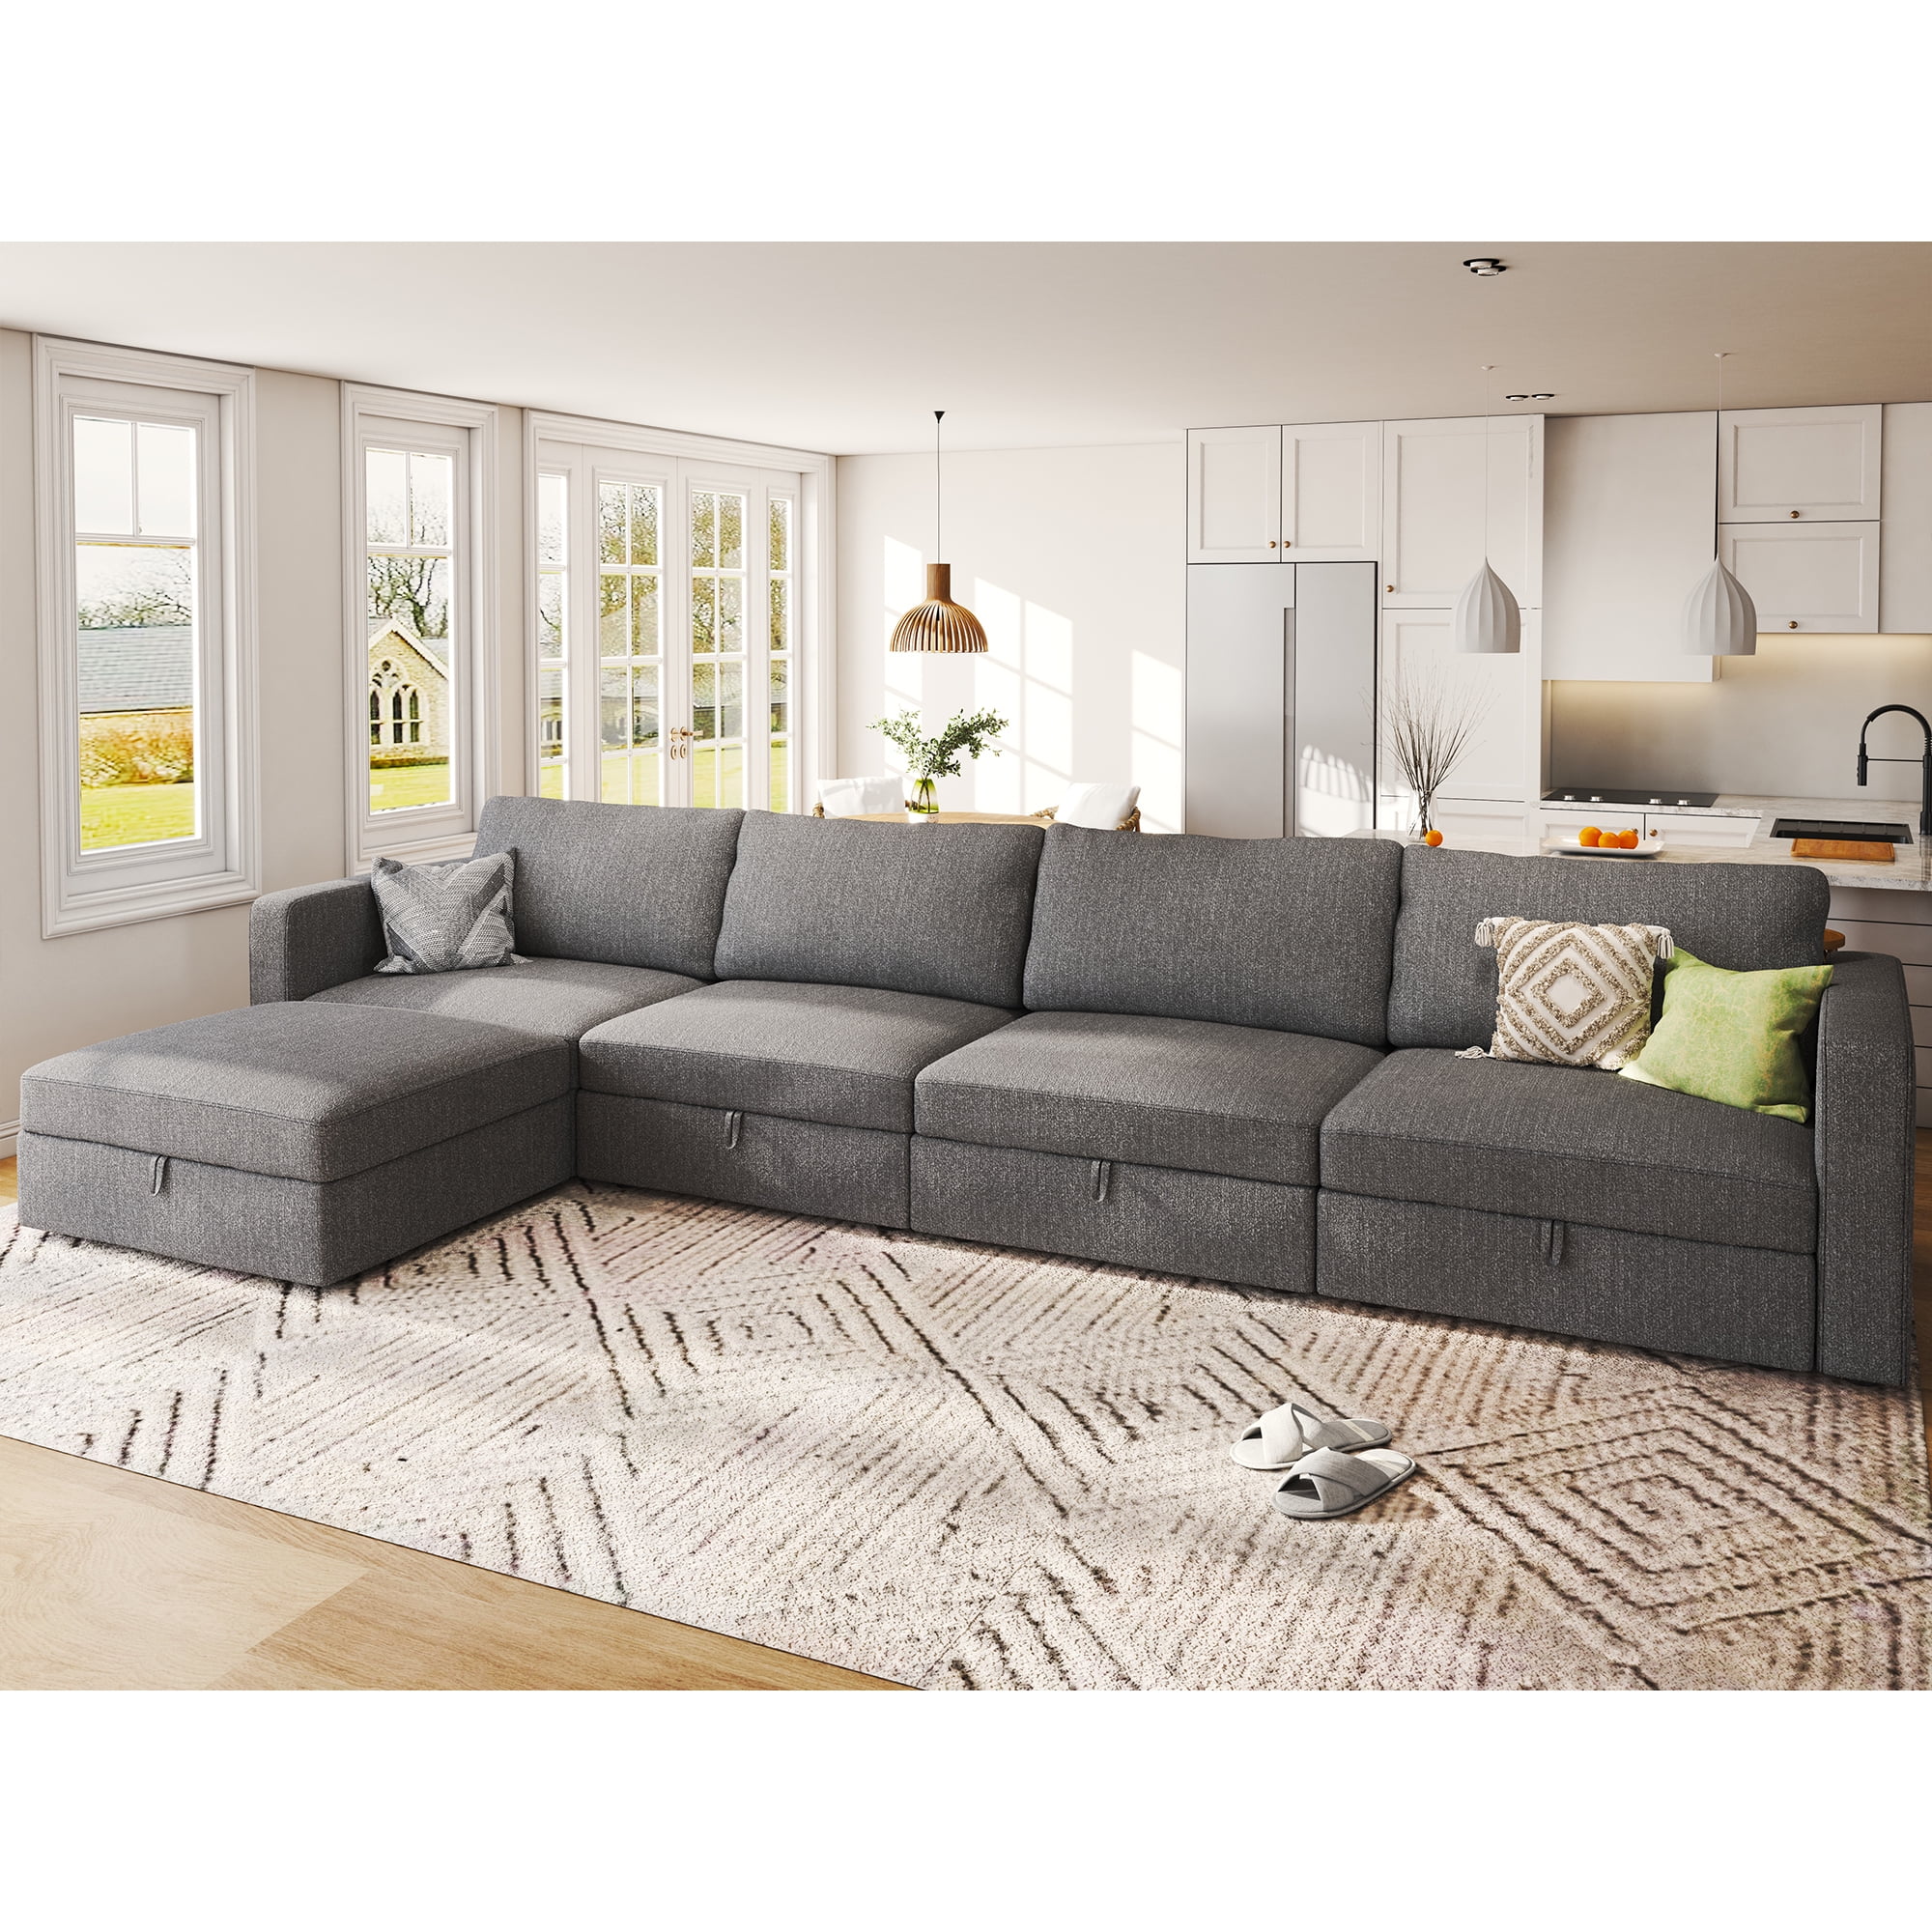 Honbay Wider Oversized Modular Extra Sectional Deep Seat Sofa Couch L Shaped With Removable Er And Storage Seats For Living Room Light Grey Com